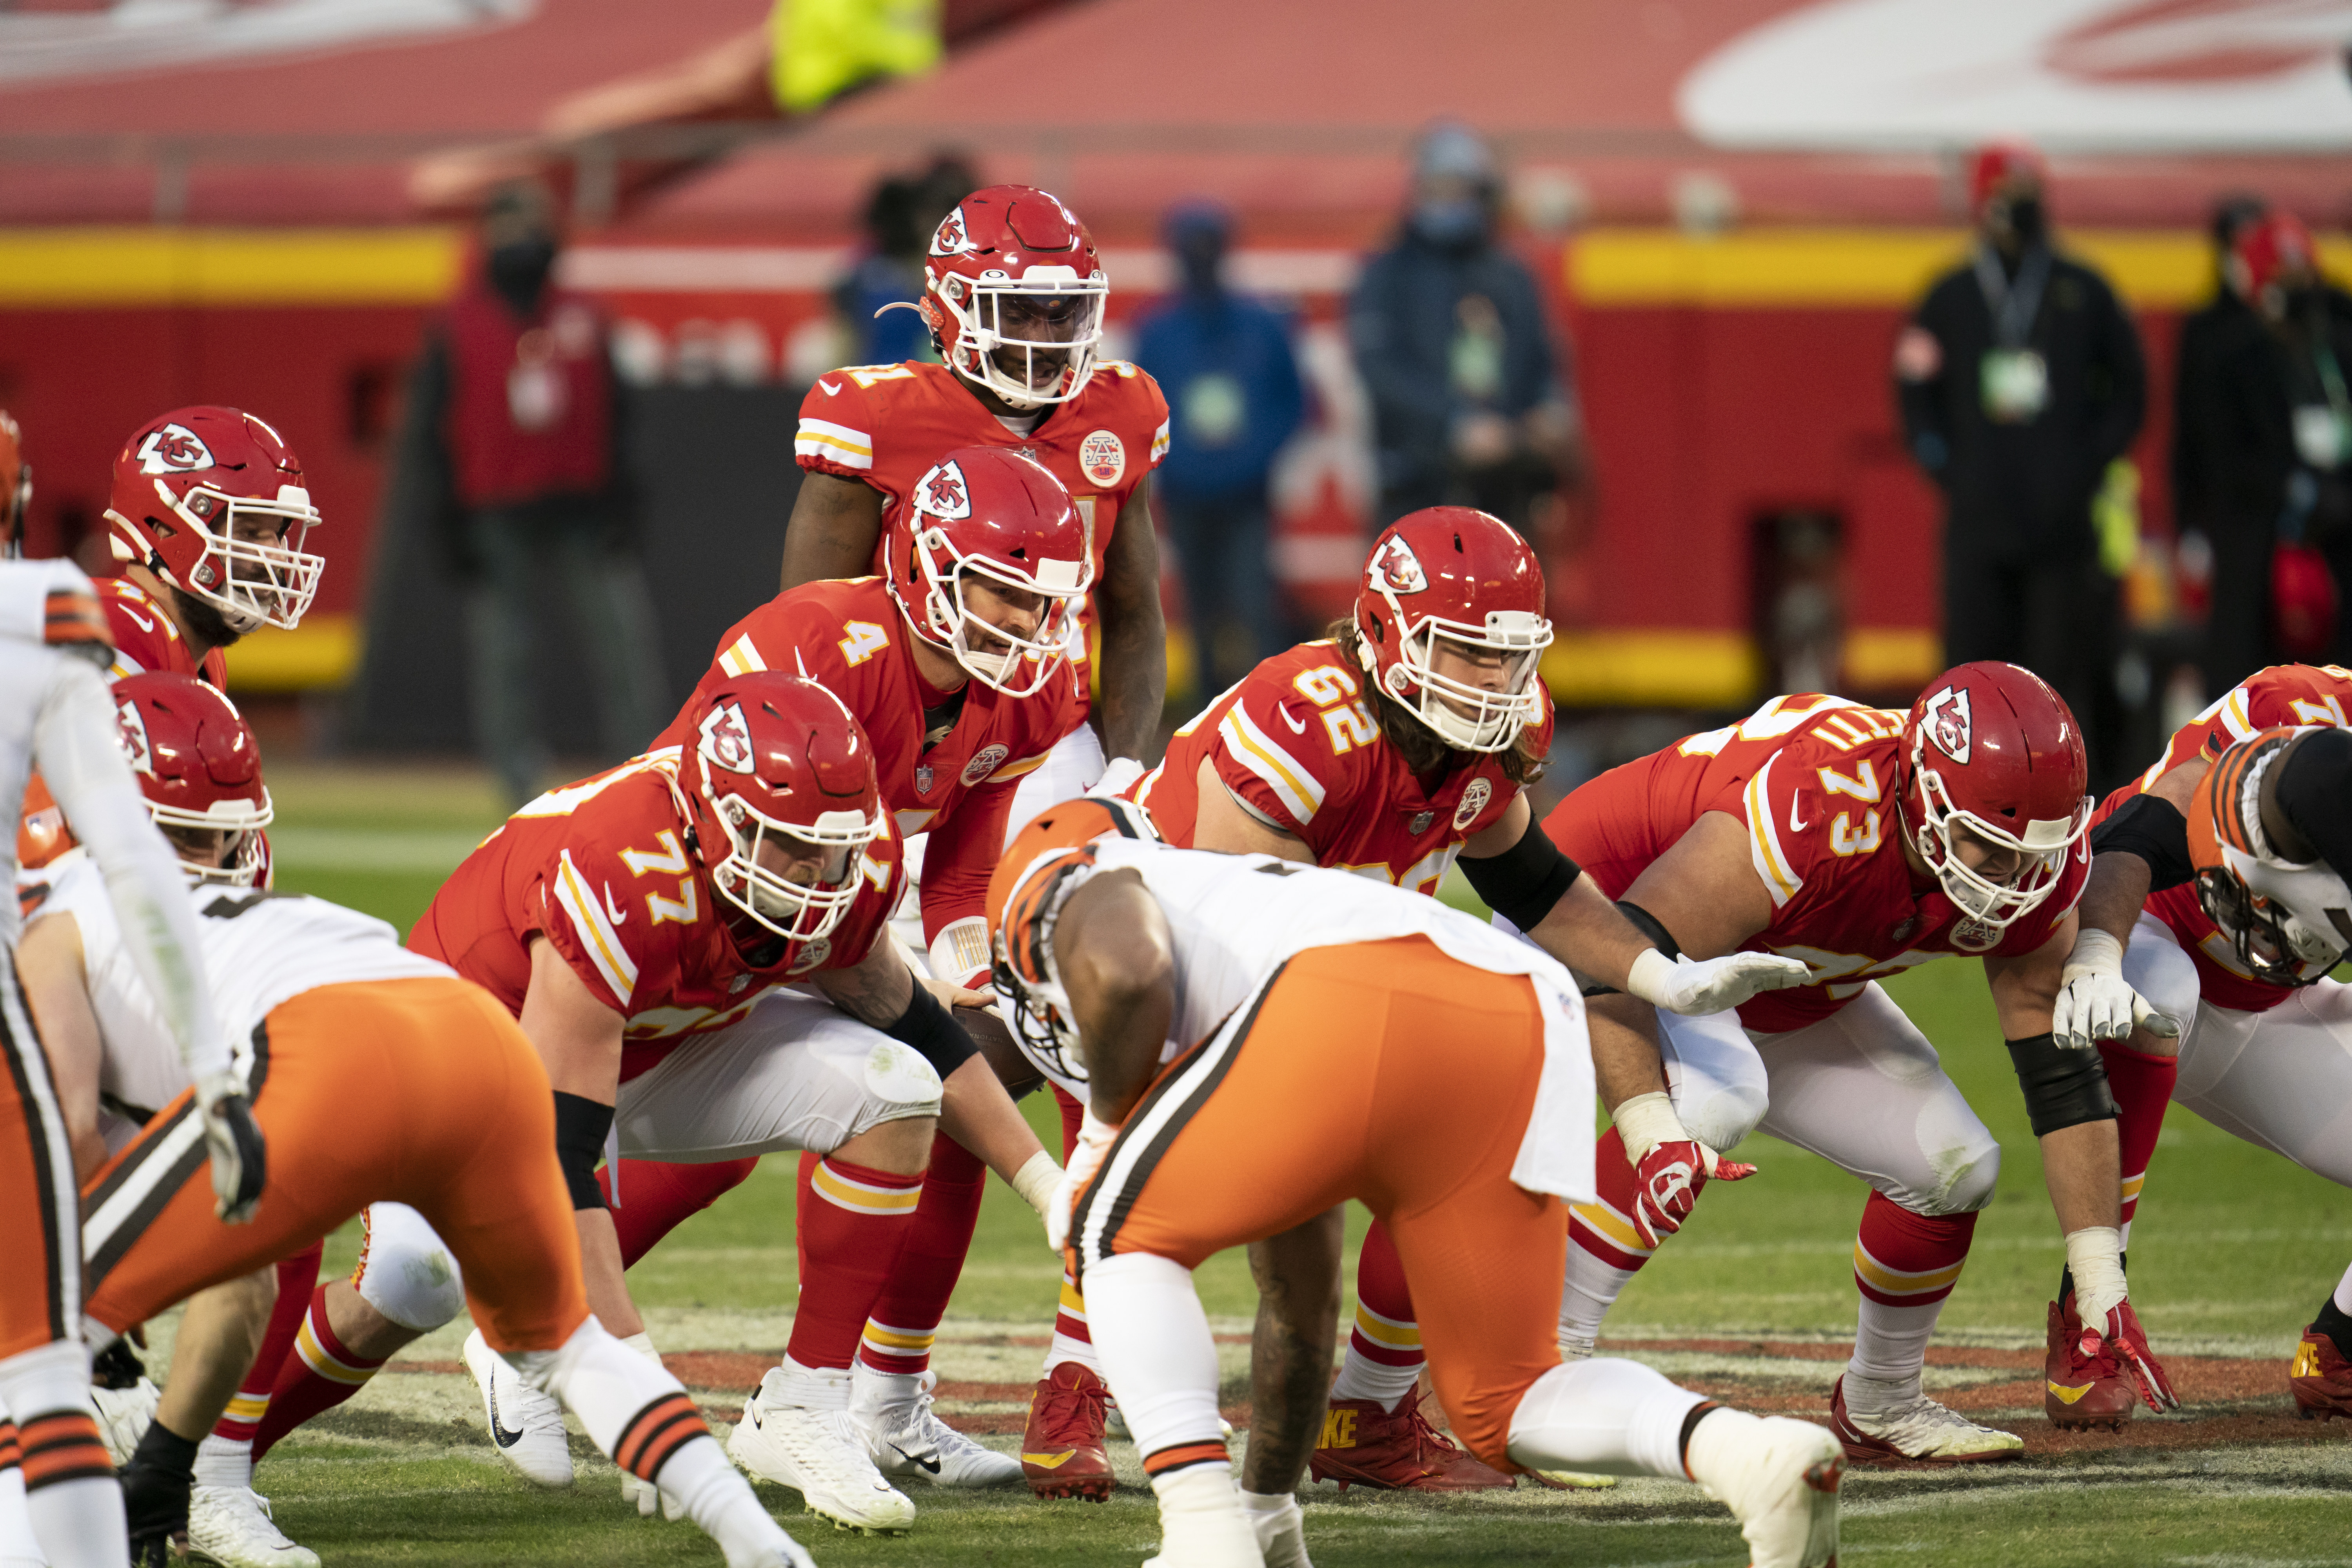 Chiefs will host Eagles on Monday night in Week 11 - NBC Sports